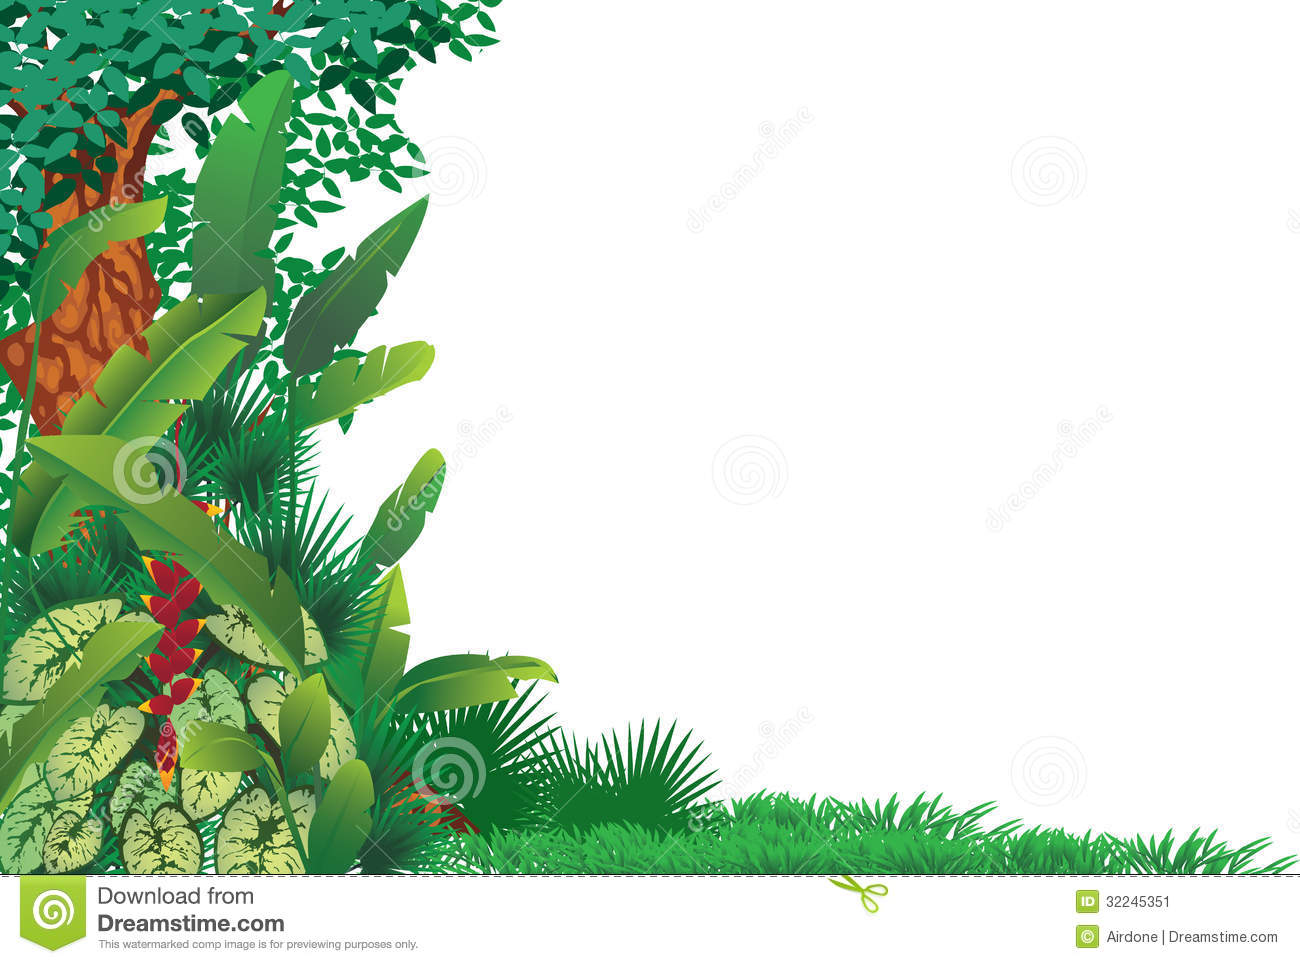 Exotic Tropical Forest Stock Image   Image  32245351